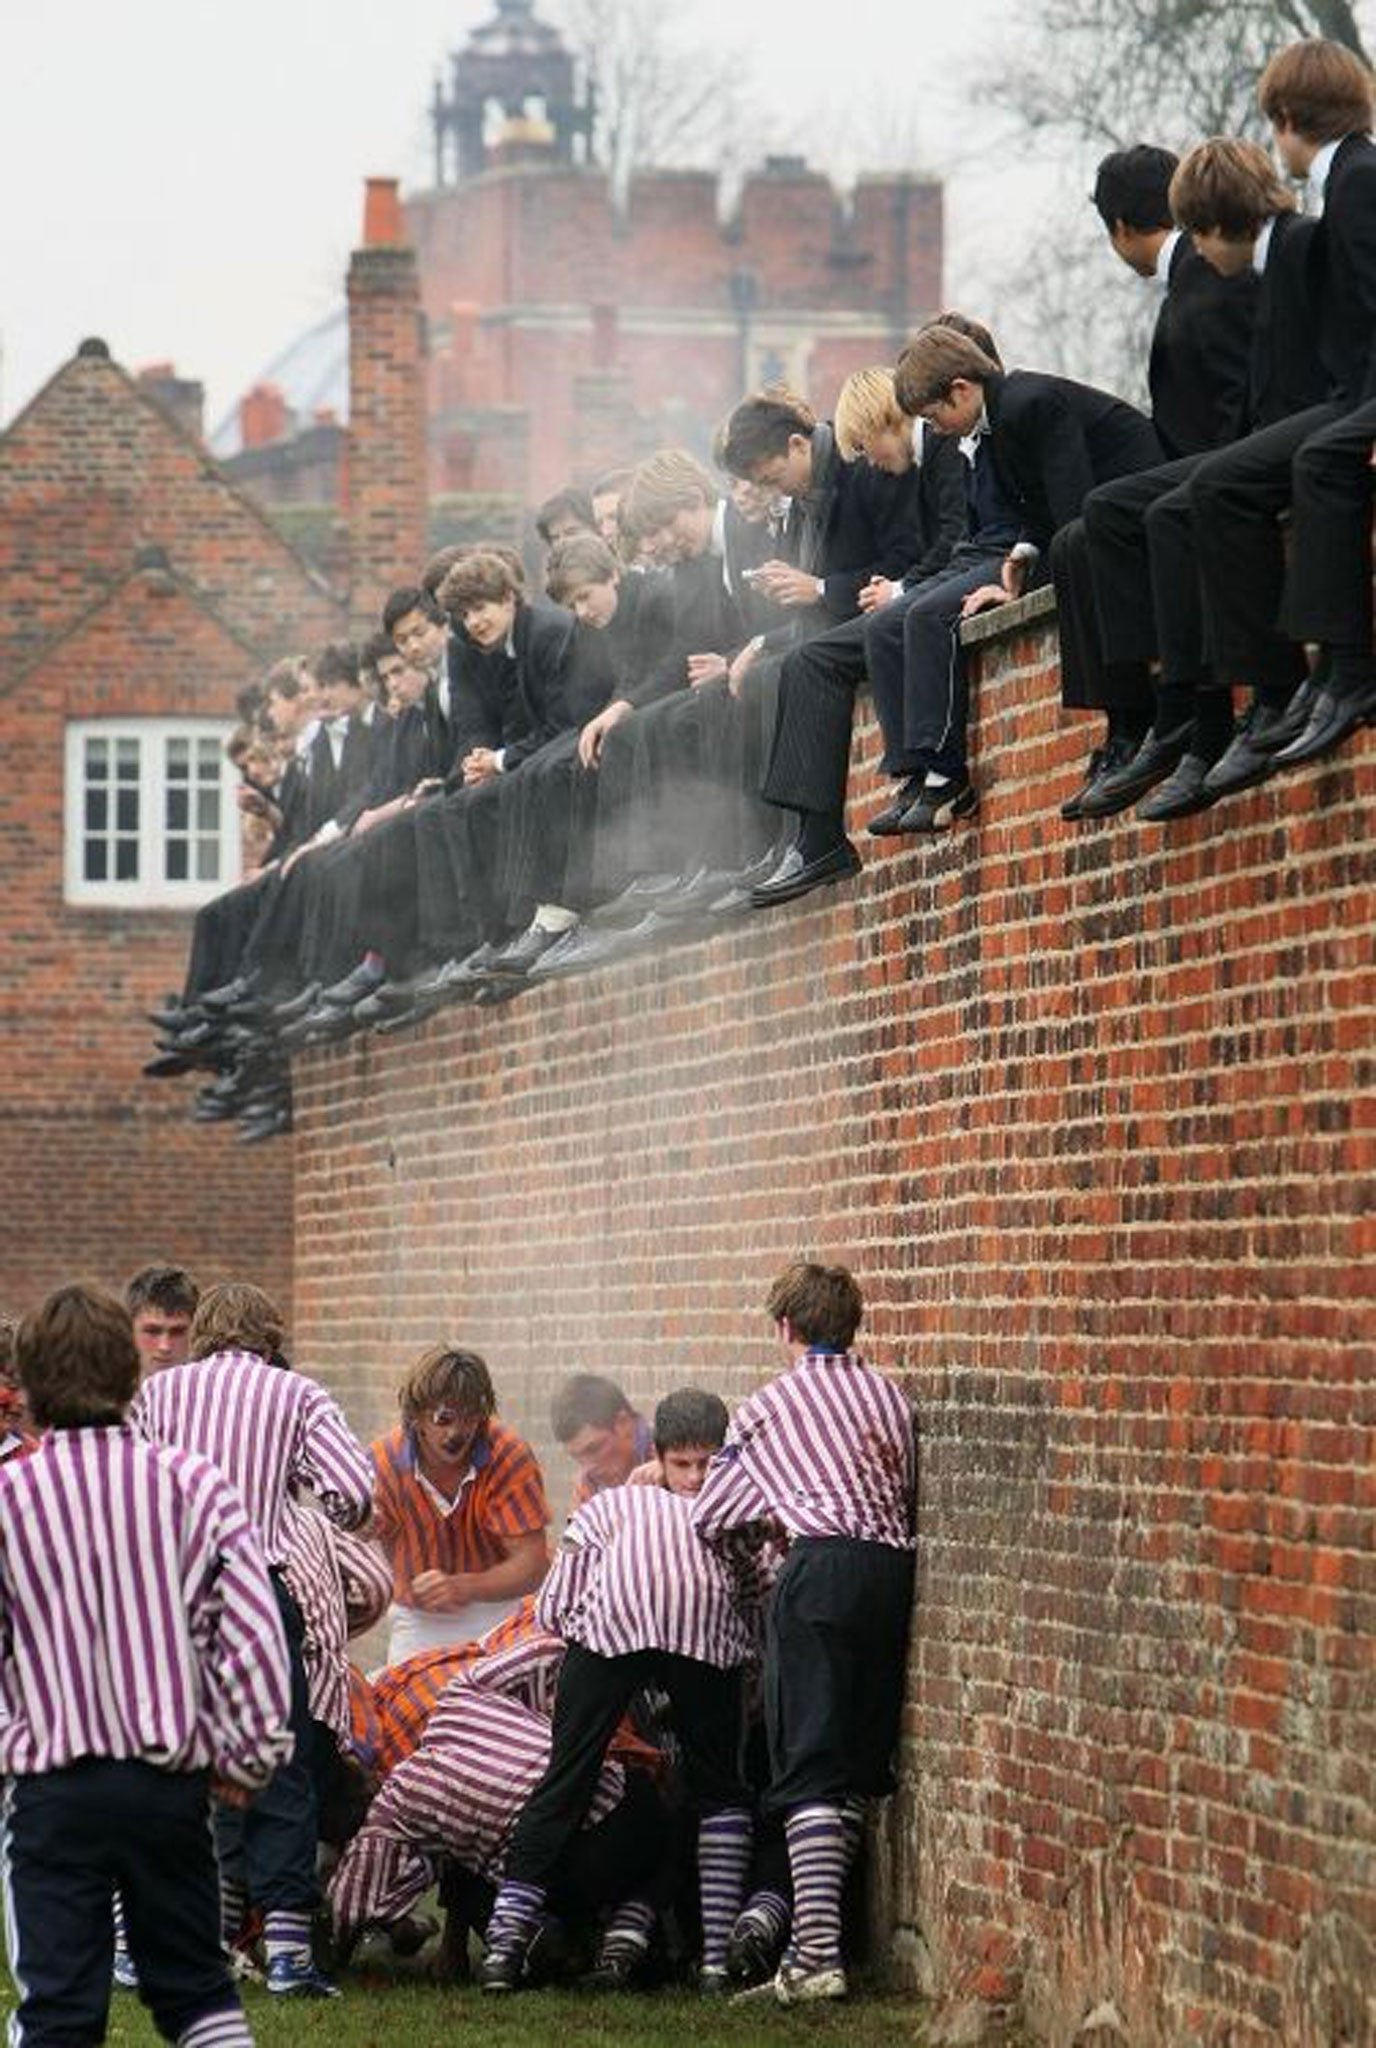 Private schools such as Eton can be very costly for parents